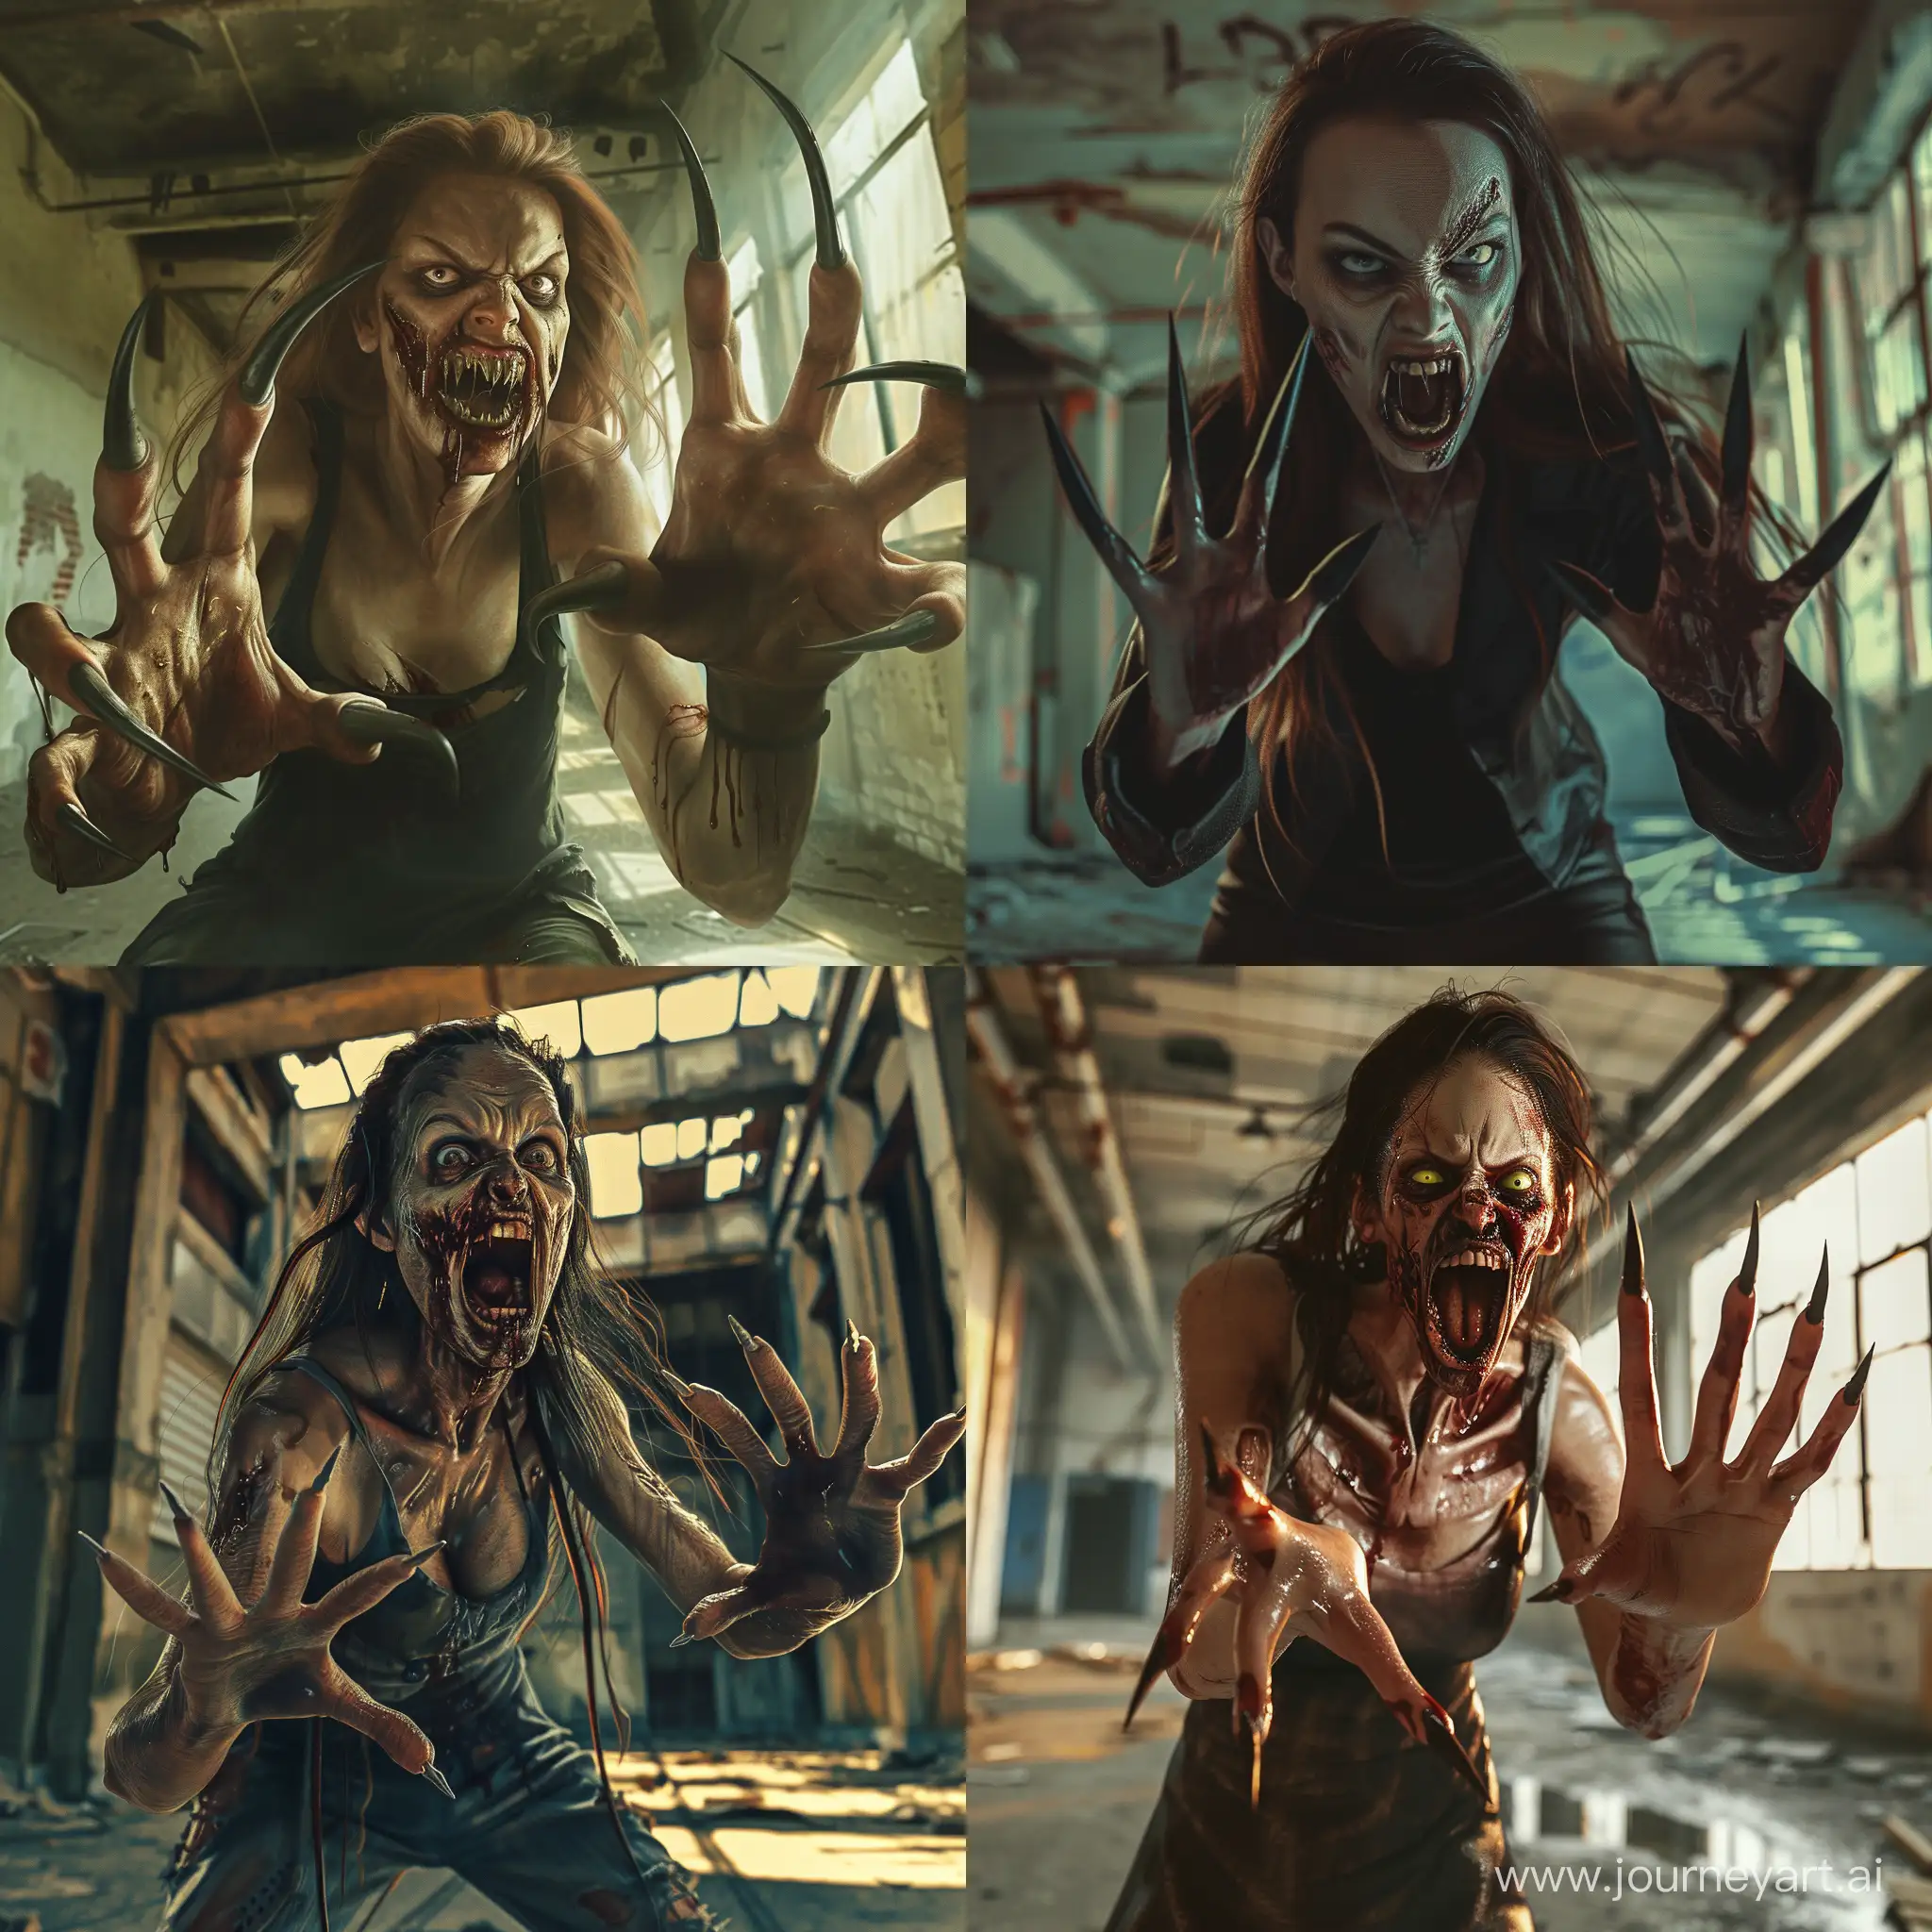 A horrible-looking zombie woman with long pointed nails on her five-fingered hands, her mouth dangerously open exposing a pointed row of fangs, she stands in a threatening pose, ready to attack her victim, the scene takes place in an abandoned building. photorealism, hyper-realism, photorealistic.